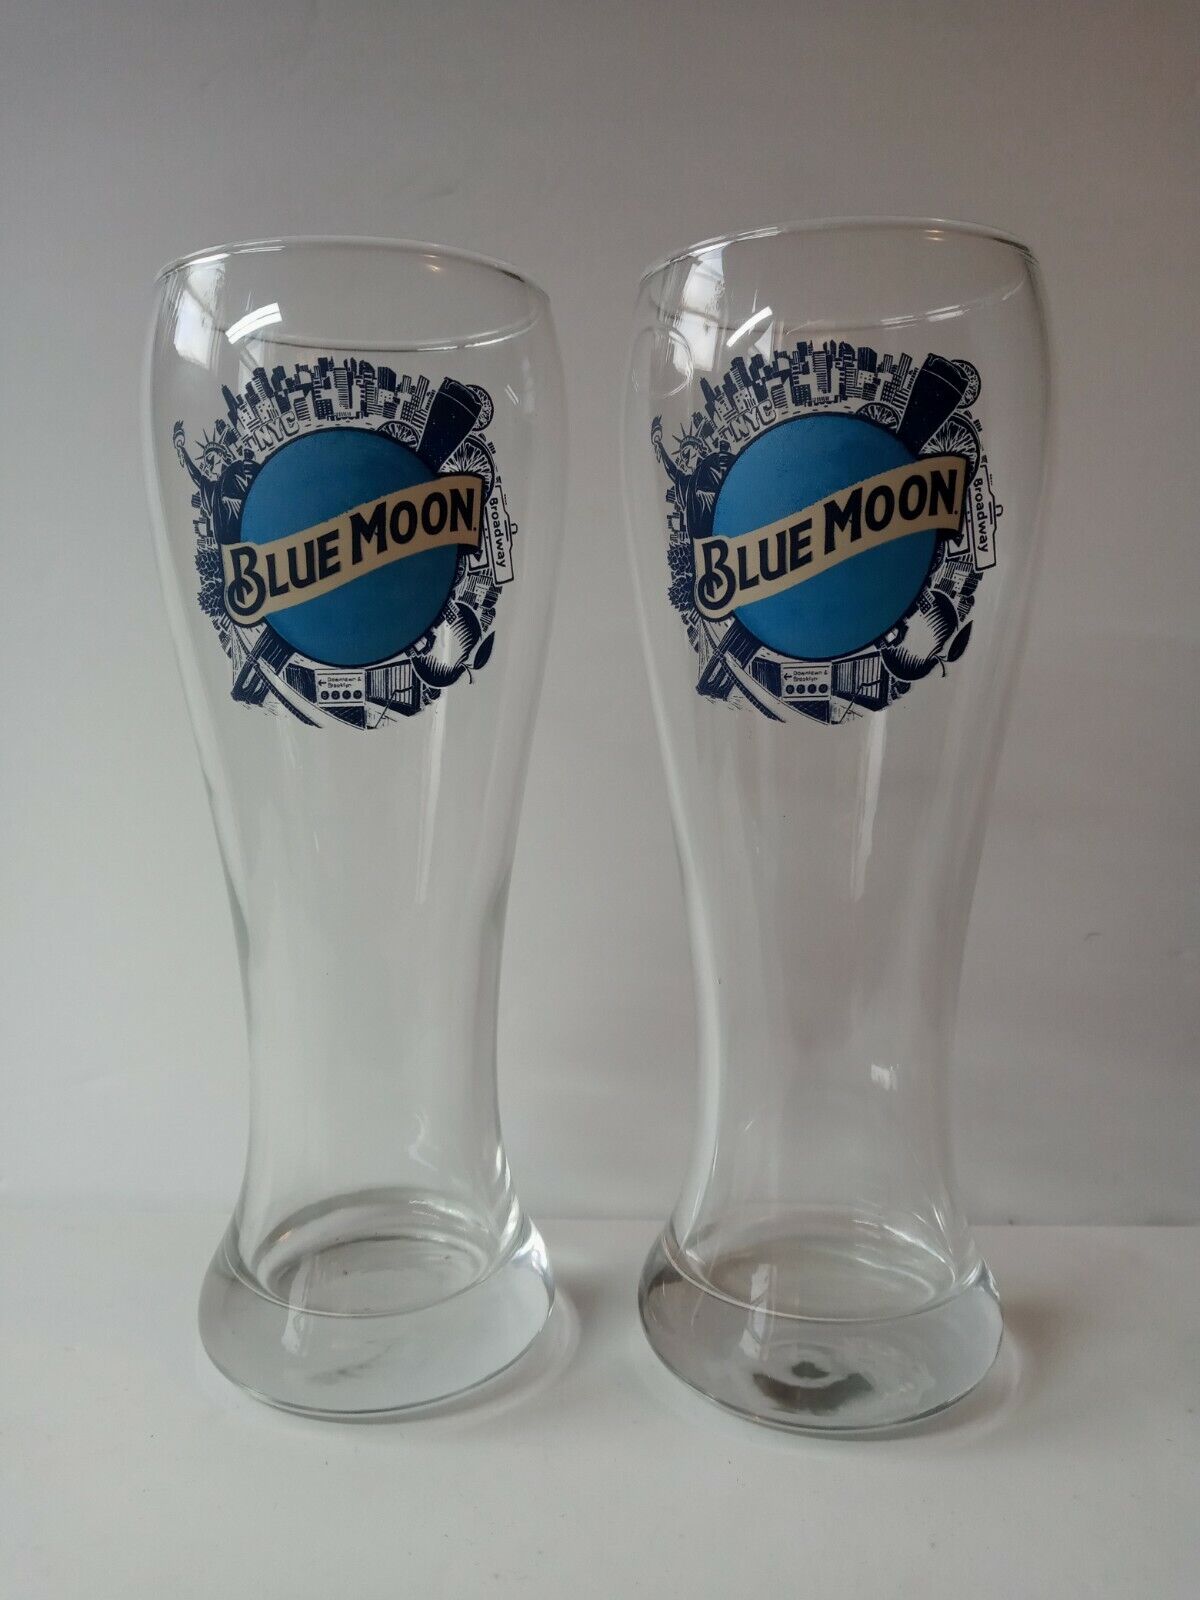 Blue Moon NYC 16 oz Pilsner Beer Glass - Set of Two (2) Glasses NY Edition New Blue Moon